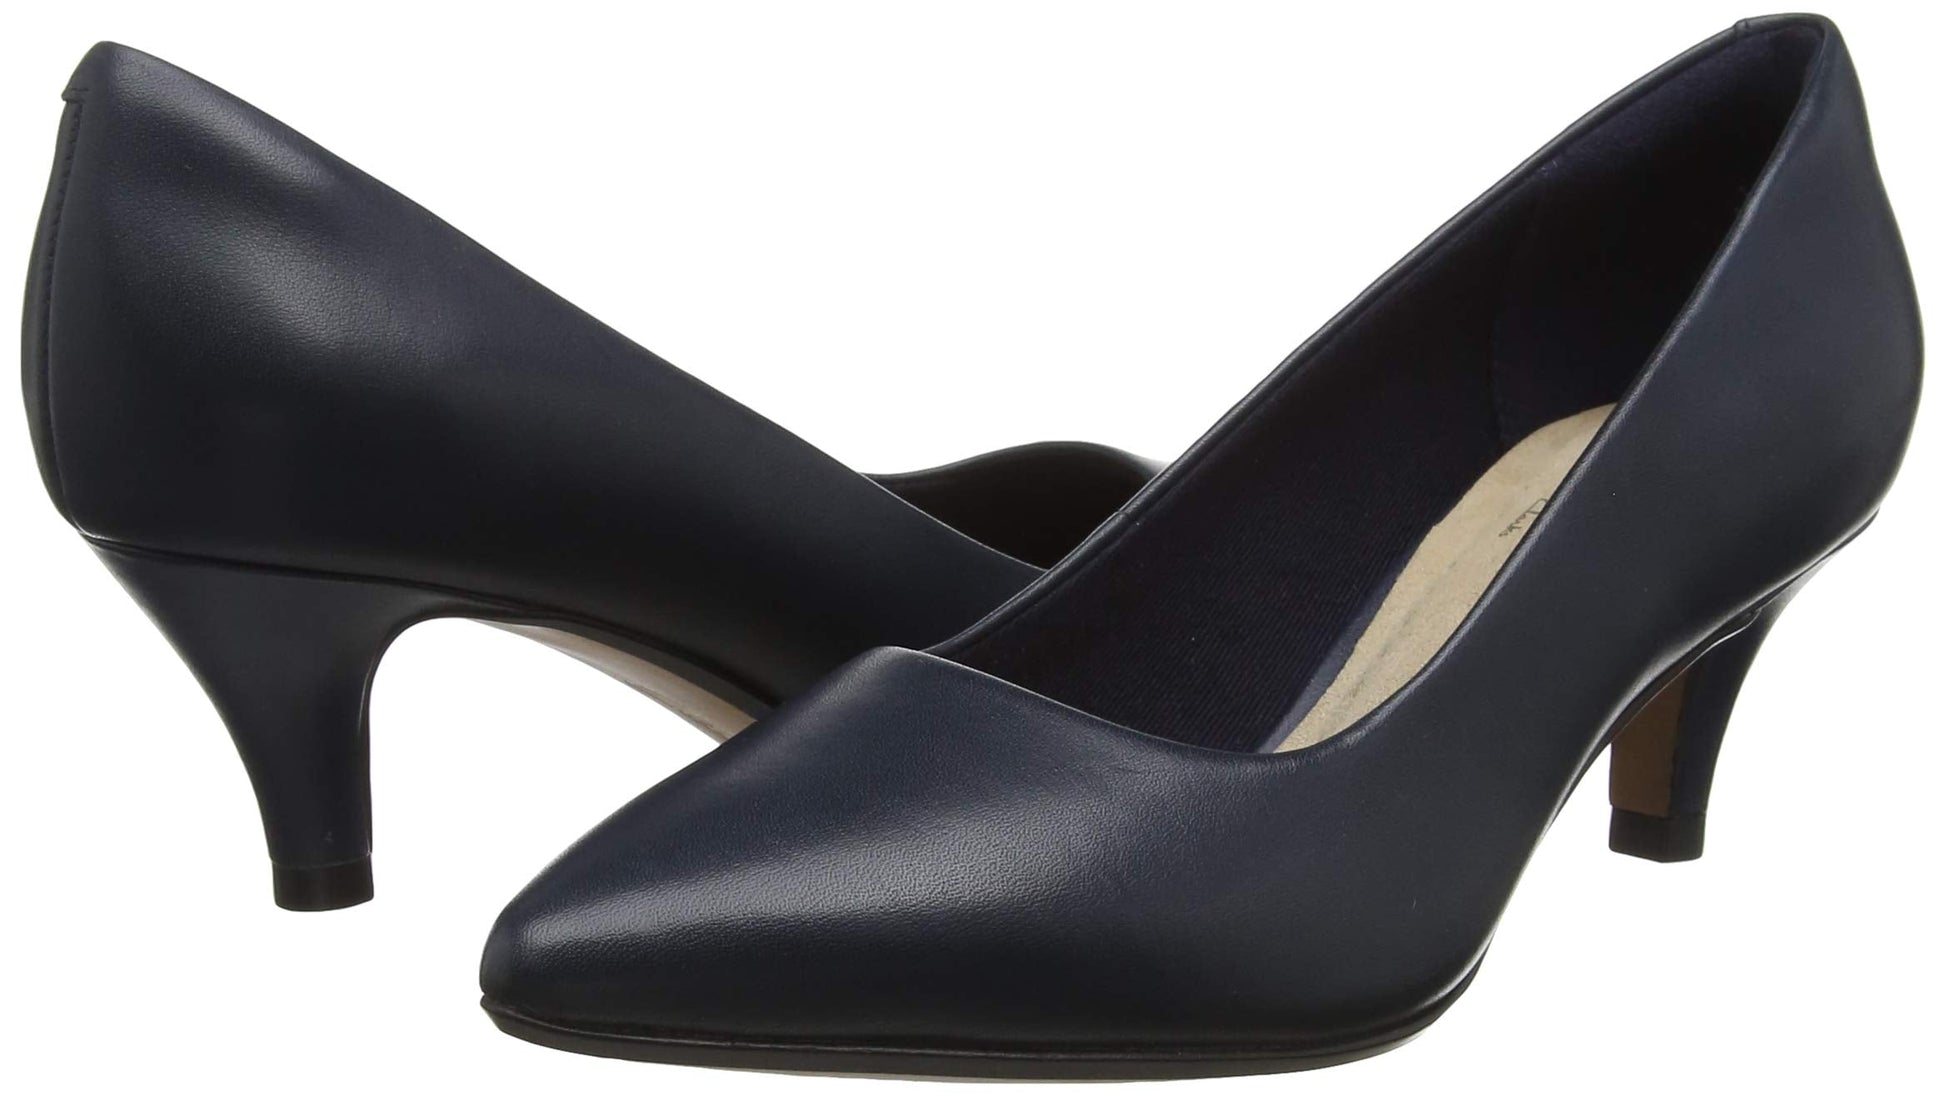 Clarks Women's Linvale Jerica Navy Leather Pumps 